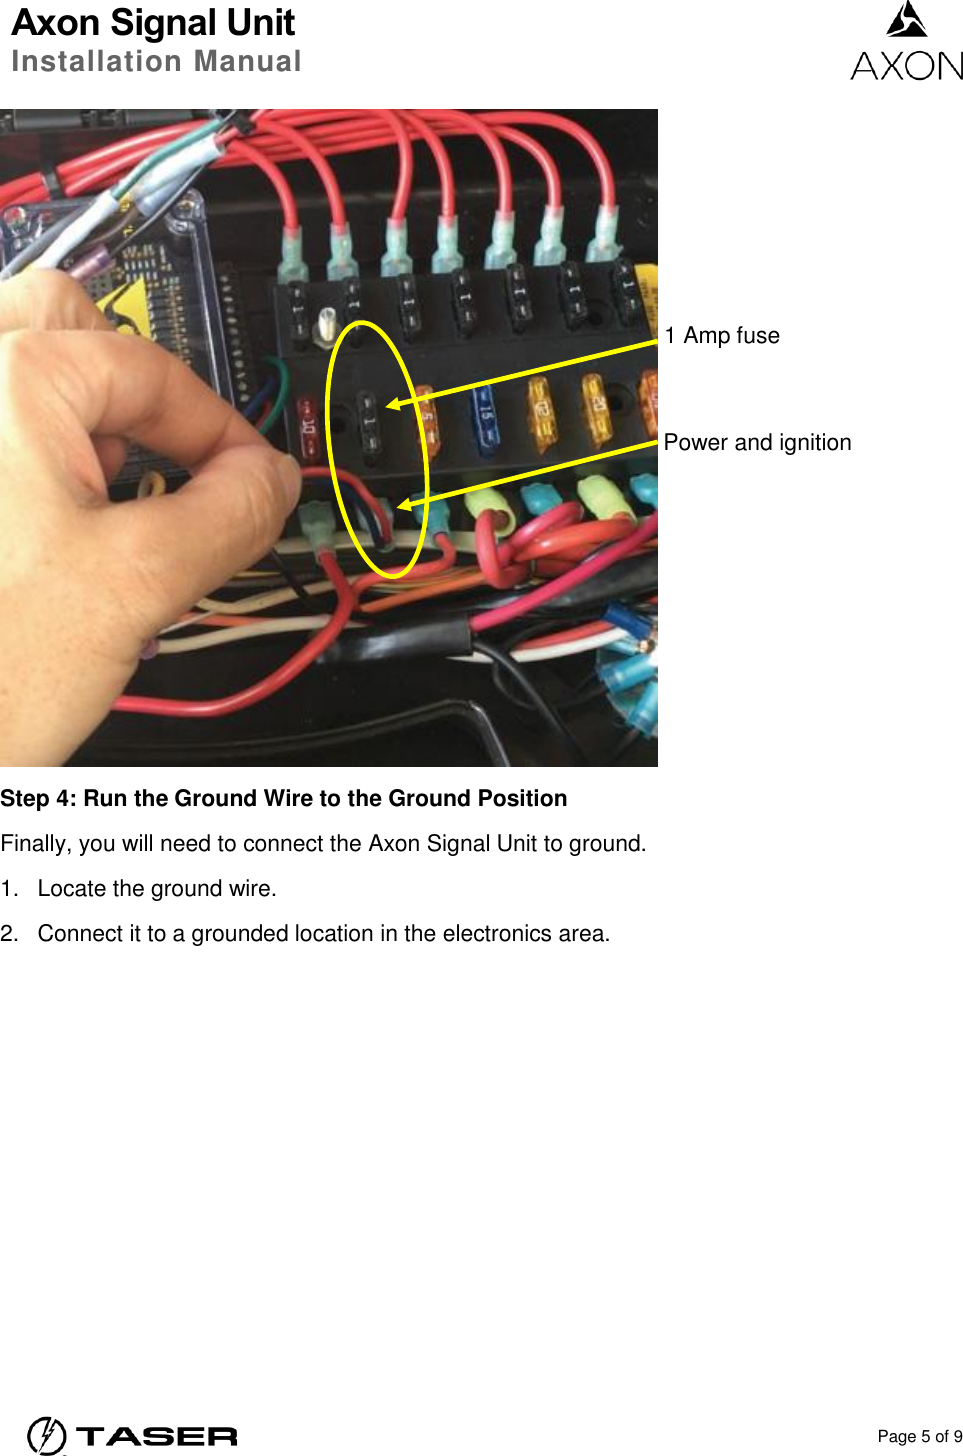 Axon Signal Unit Installation Manual    Page 5 of 9   Step 4: Run the Ground Wire to the Ground Position Finally, you will need to connect the Axon Signal Unit to ground.  1.  Locate the ground wire. 2.  Connect it to a grounded location in the electronics area.  1 Amp fuse Power and ignition 